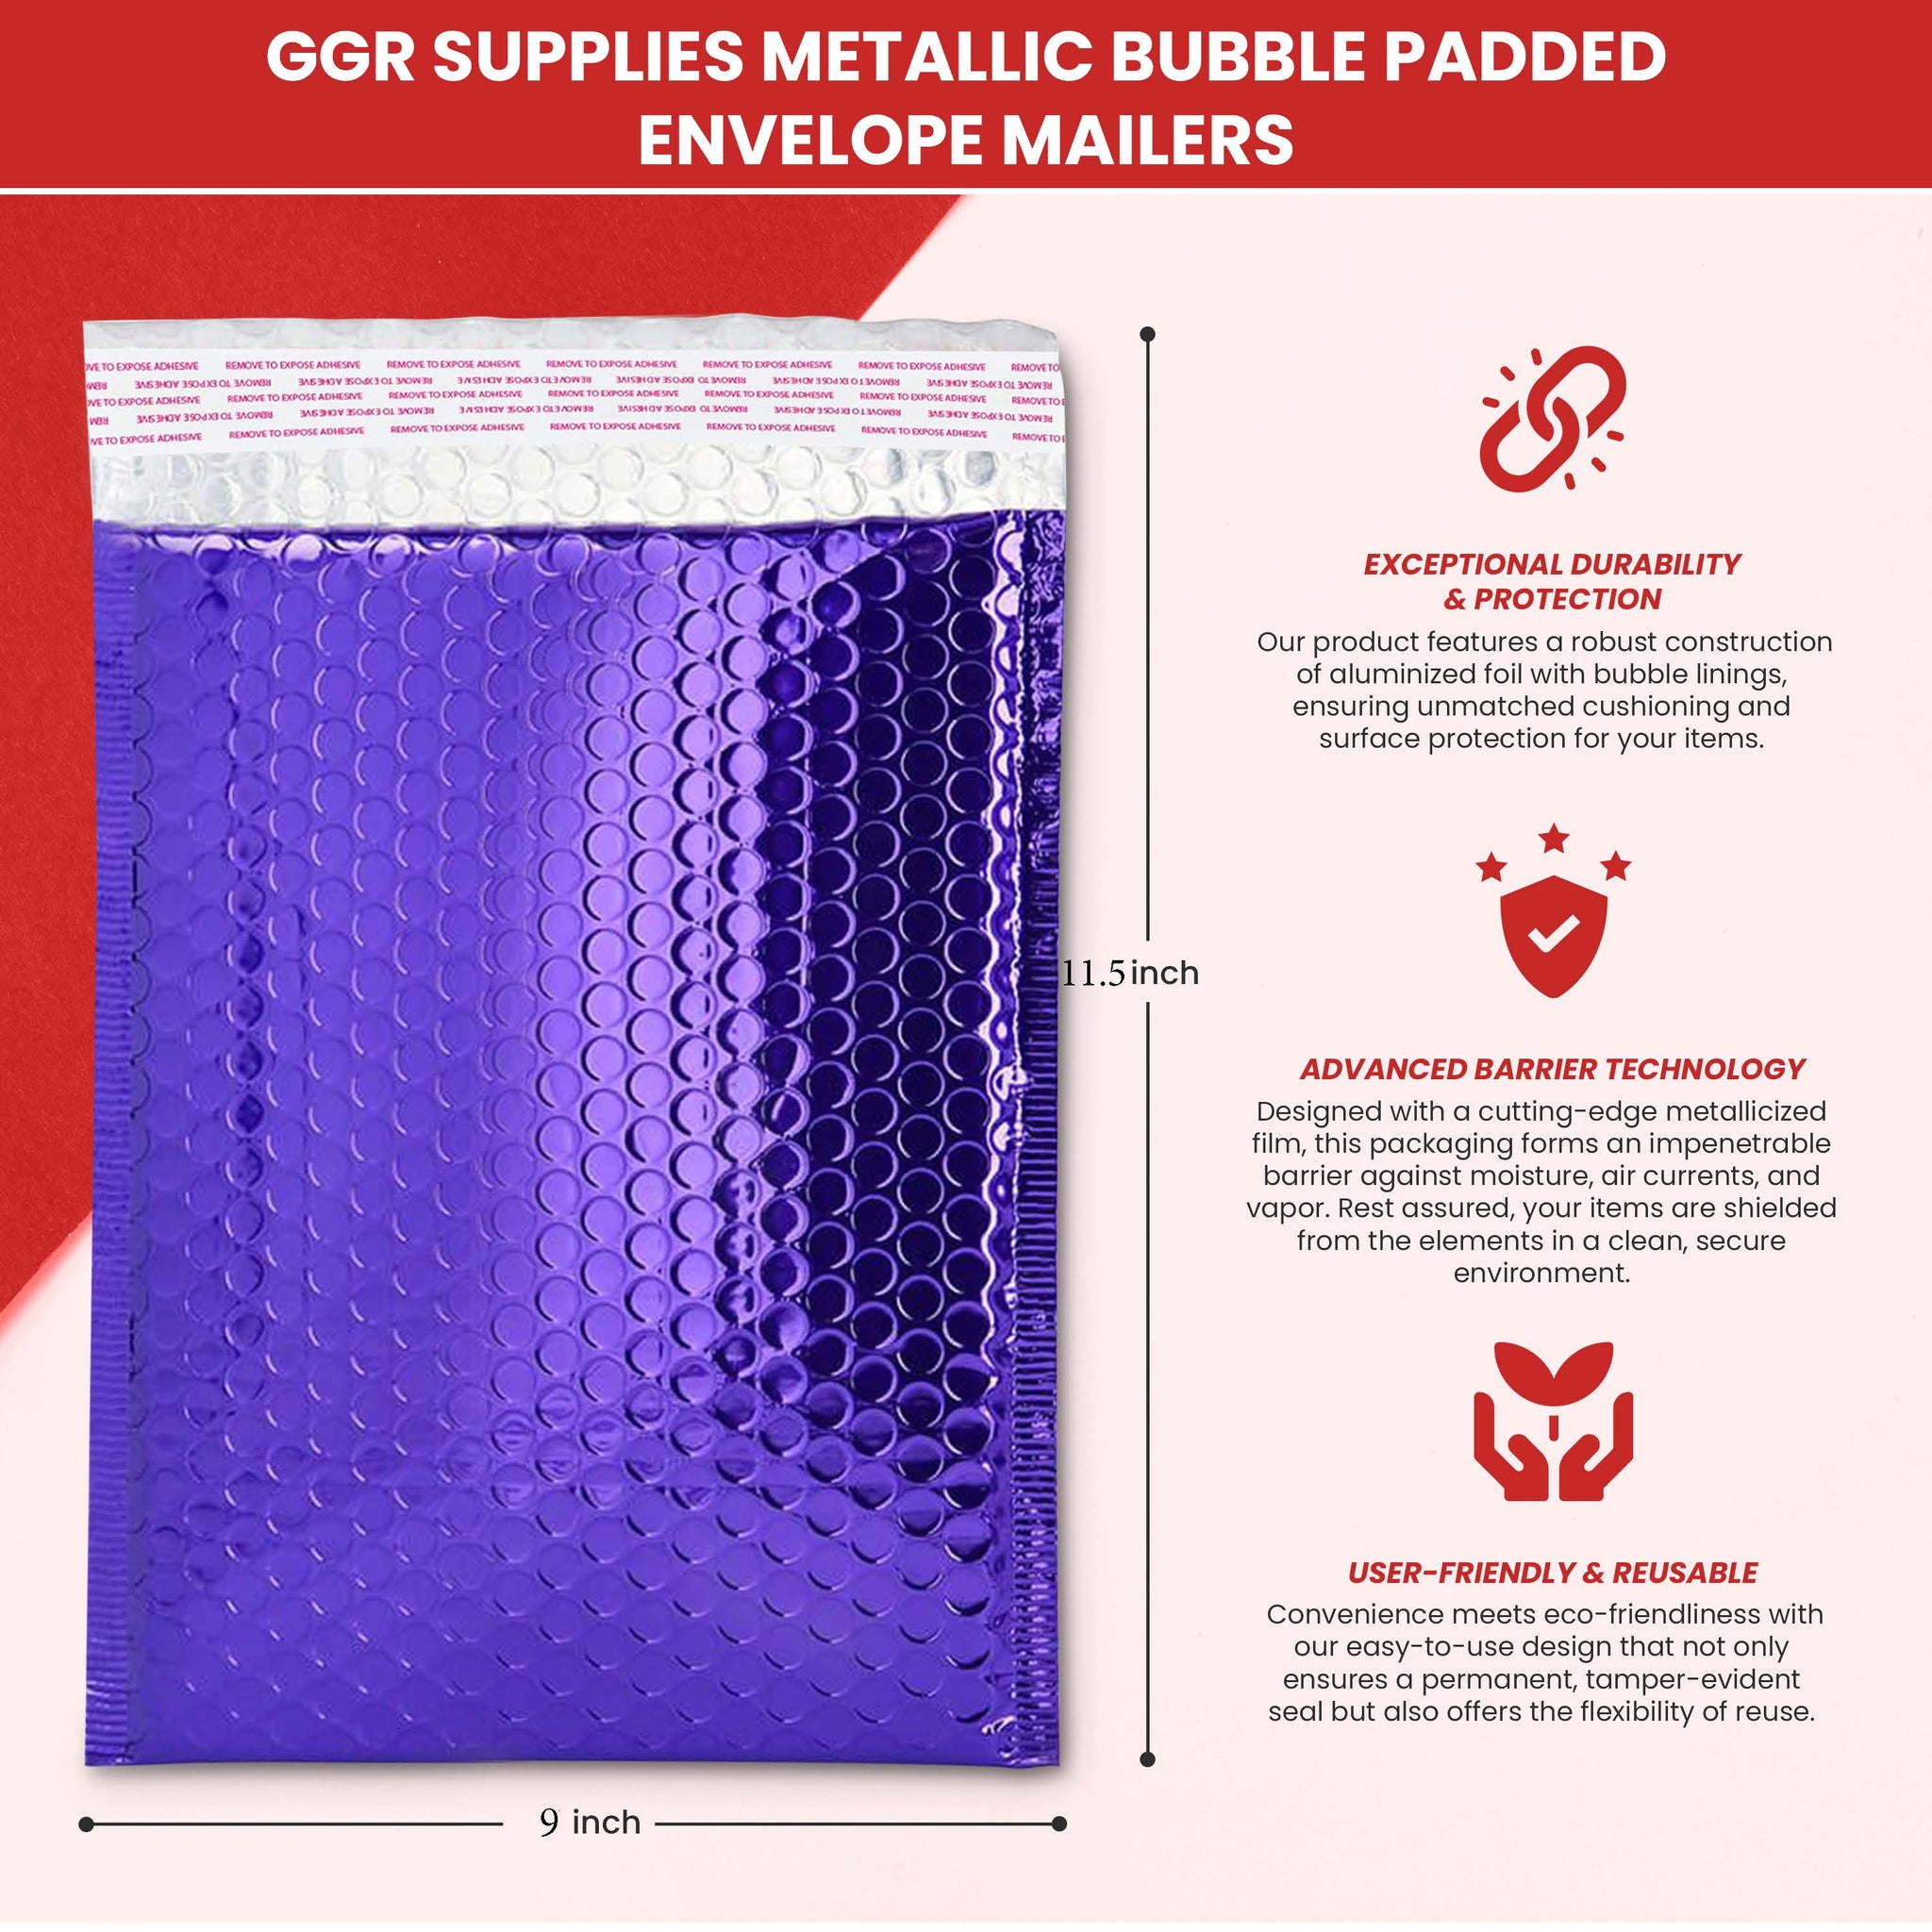 GGR Supplies Metallic Bubble Padded Envelope Mailers, 9 X 11.5 Inches, Waterproof Ultra Resistant Ideal For Packing, Shipping, and Storing. Pack of 25